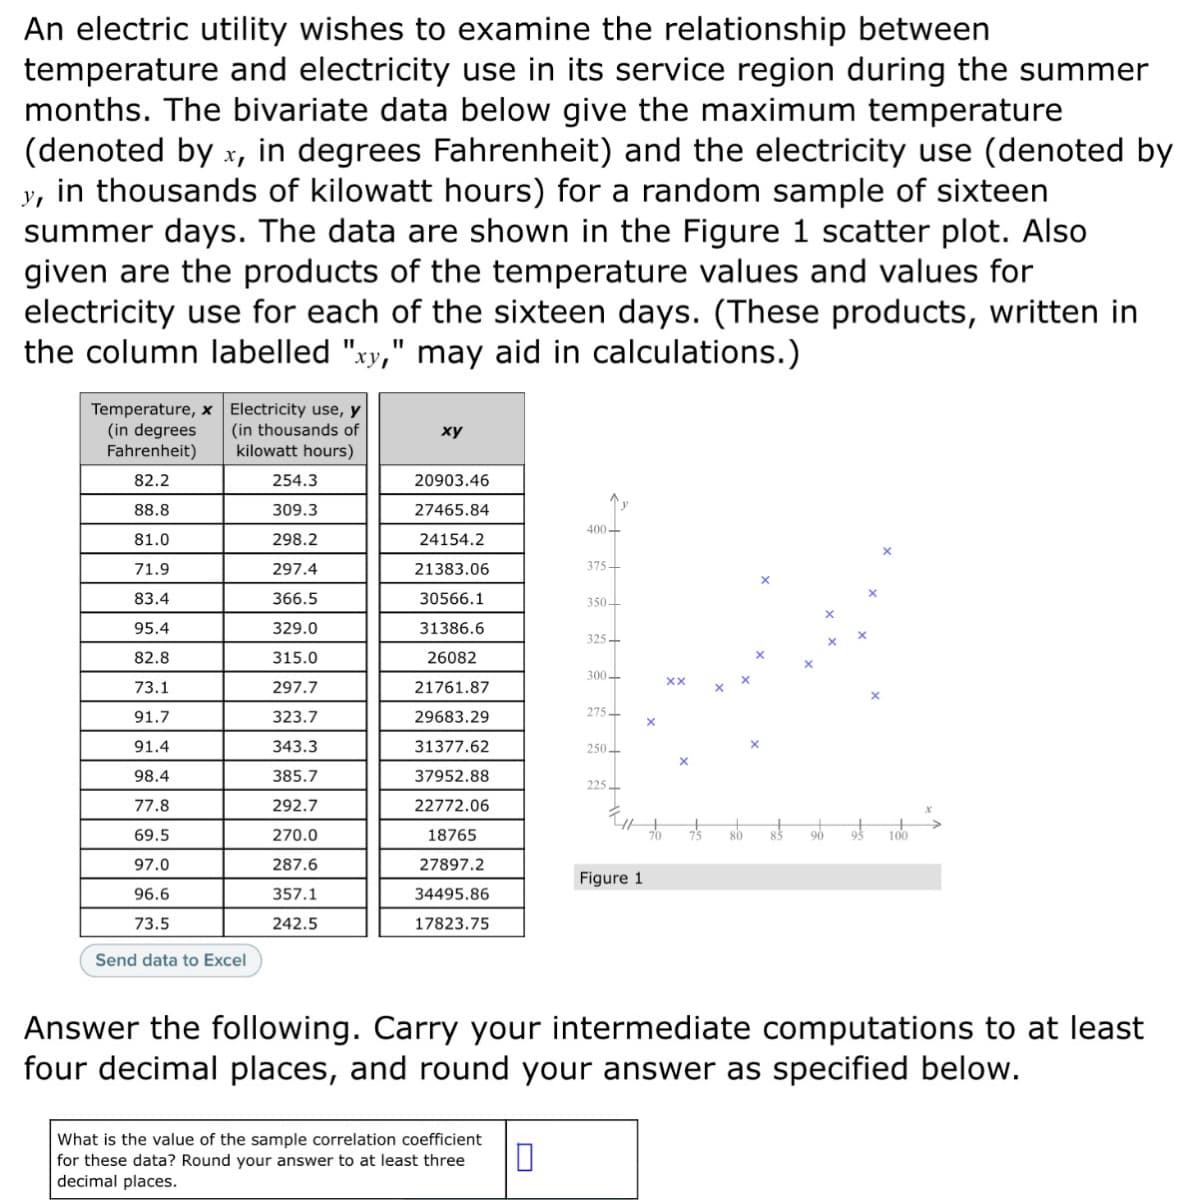 An electric utility wishes to examine the relationship between
temperature and electricity use in its service region during the summer
months. The bivariate data below give the maximum temperature
(denoted by x, in degrees Fahrenheit) and the electricity use (denoted by
in thousands of kilowatt hours) for a random sample of sixteen
summer days. The data are shown in the Figure 1 scatter plot. Also
given are the products of the temperature values and values for
electricity use for each of the sixteen days. (These products, written in
the column labelled "xy," may aid in calculations.)
У,
Temperature, x Electricity use, y
(in degrees
Fahrenheit)
(in thousands of
kilowatt hours)
ху
82.2
254.3
20903.46
88.8
309.3
27465.84
400-
81.0
298.2
24154.2
71.9
297.4
21383.06
375-
83.4
366.5
30566.1
350-
95.4
329.0
31386.6
325-
82.8
315.0
26082
300
73.1
297.7
21761.87
91.7
323.7
29683.29
275-
91.4
343.3
31377.62
250
98.4
385.7
37952.88
225
77.8
292.7
22772.06
69.5
270.0
18765
80
90
100
97.0
287.6
27897.2
Figure 1
96.6
357.1
34495.86
73.5
242.5
17823.75
Send data to Excel
Answer the following. Carry your intermediate computations to at least
four decimal places, and round your answer as specified below.
What is the value of the sample correlation coefficient
for these data? Round your answer to at least three
decimal places.
